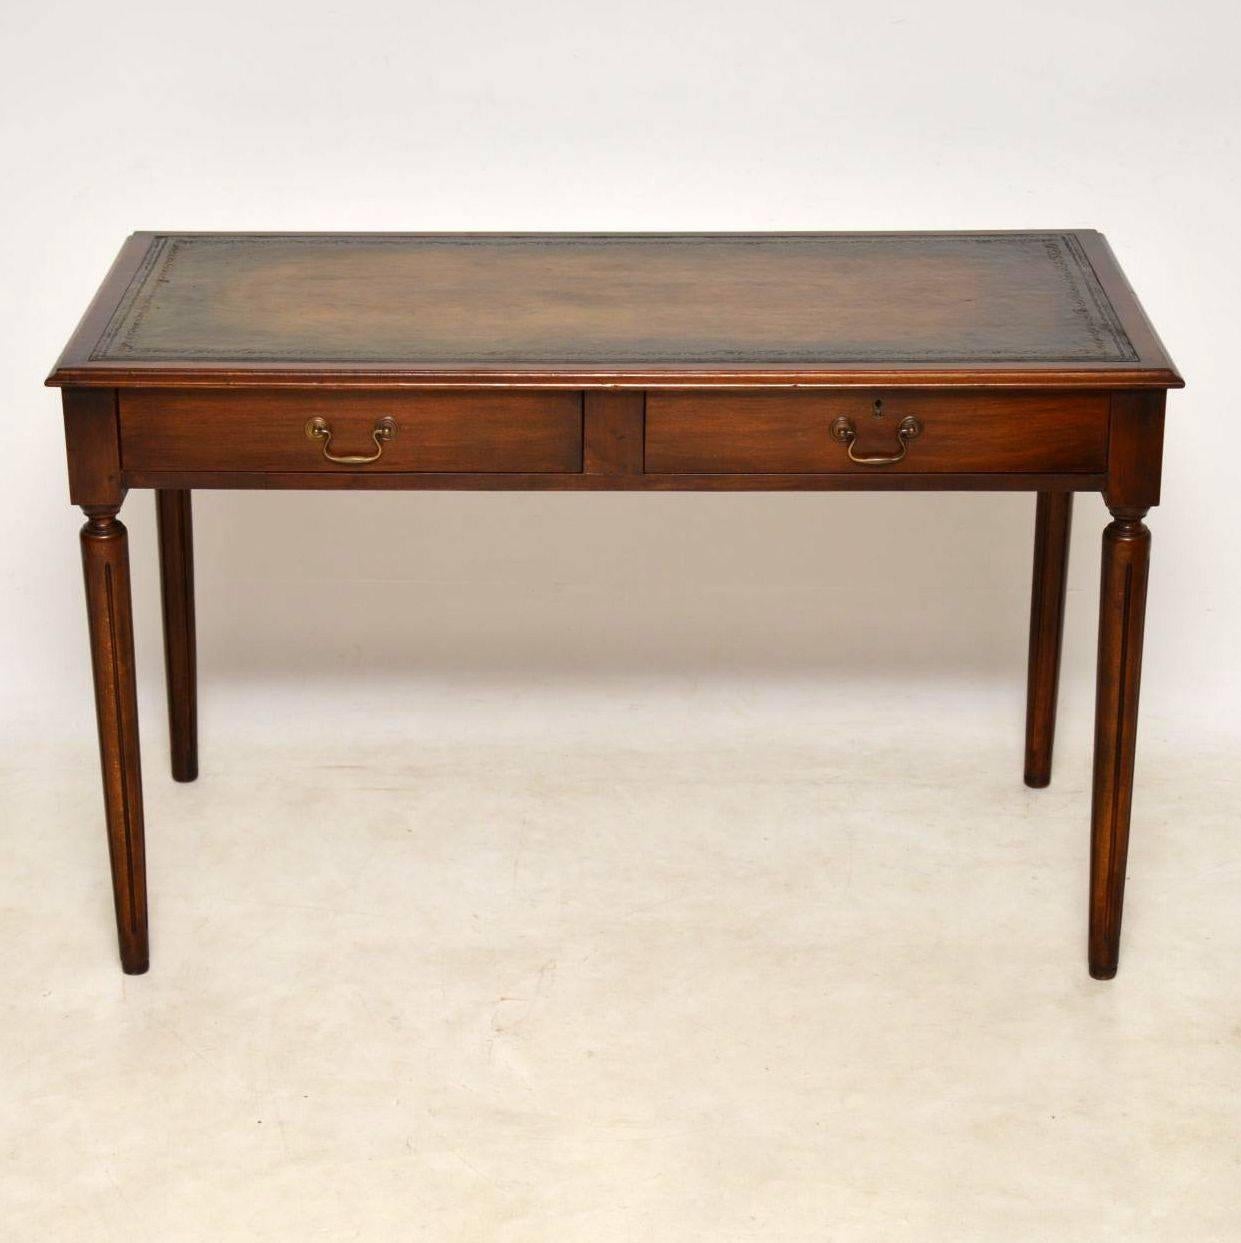 Nice quality antique mahogany writing table desk in lovely condition. It has a tooled leather writing surface, with two drawers below that have the original brass handles. One of the drawers has a lock. This desk sits on turned fluted legs and it